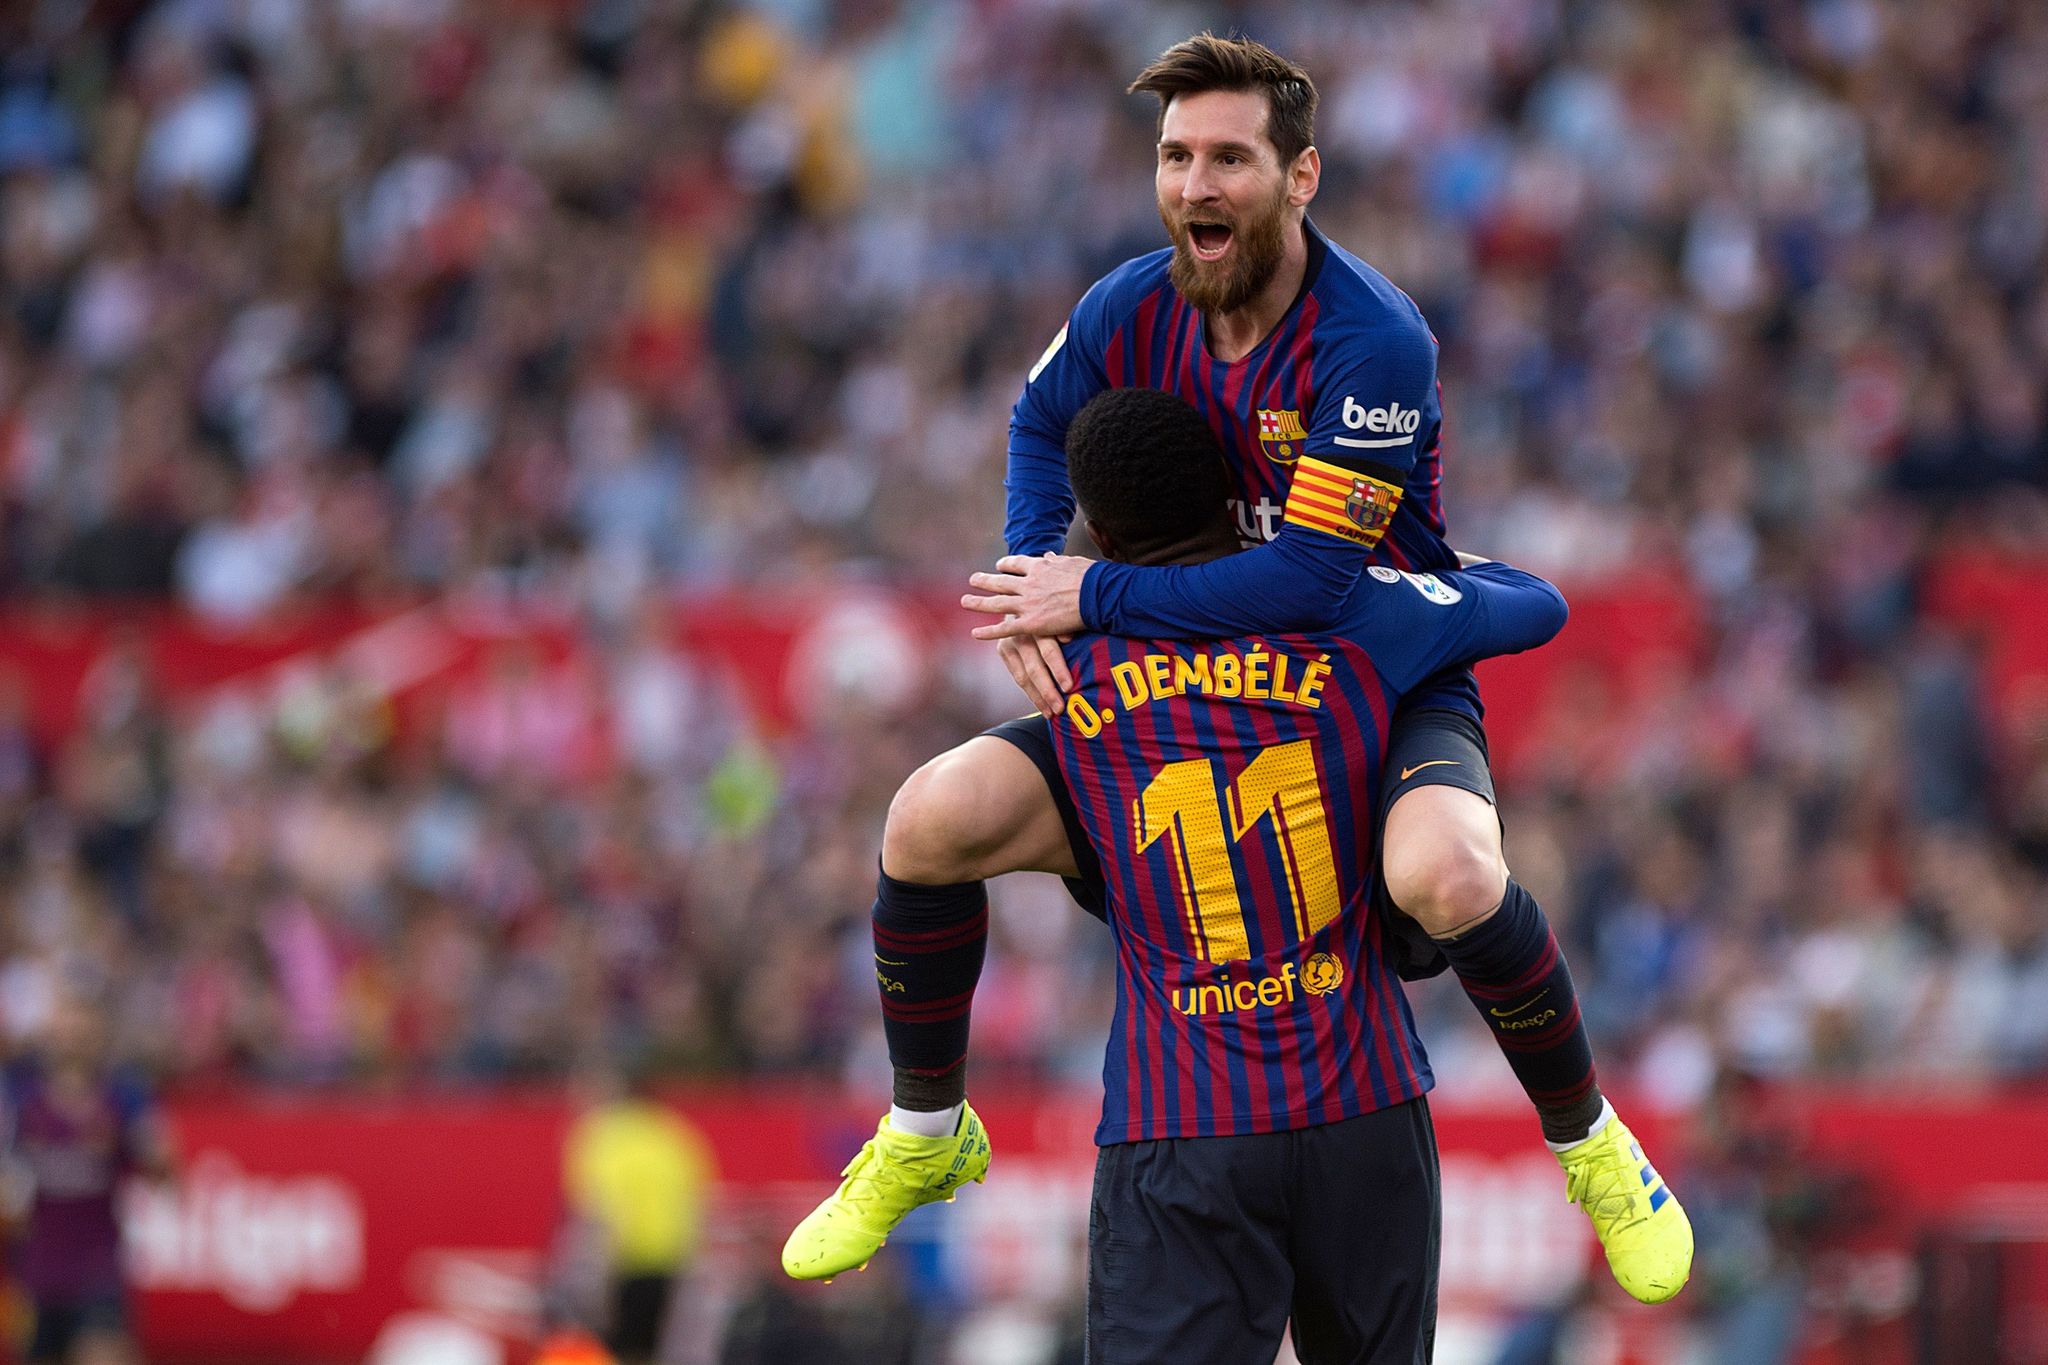 TOPSHOT - Barcelonas Argentinian forward Lionel <HIT>Messi</HIT> (back) celebrates with Barcelonas French forward Ousmane <HIT>Dembele</HIT> after scoring a goal during the Spanish league football match between Sevilla FC and FC Barcelona at the Ramon Sanchez Pizjuan stadium in Sevilla on February 23, 2019. (Photo by JORGE GUERRERO / AFP)